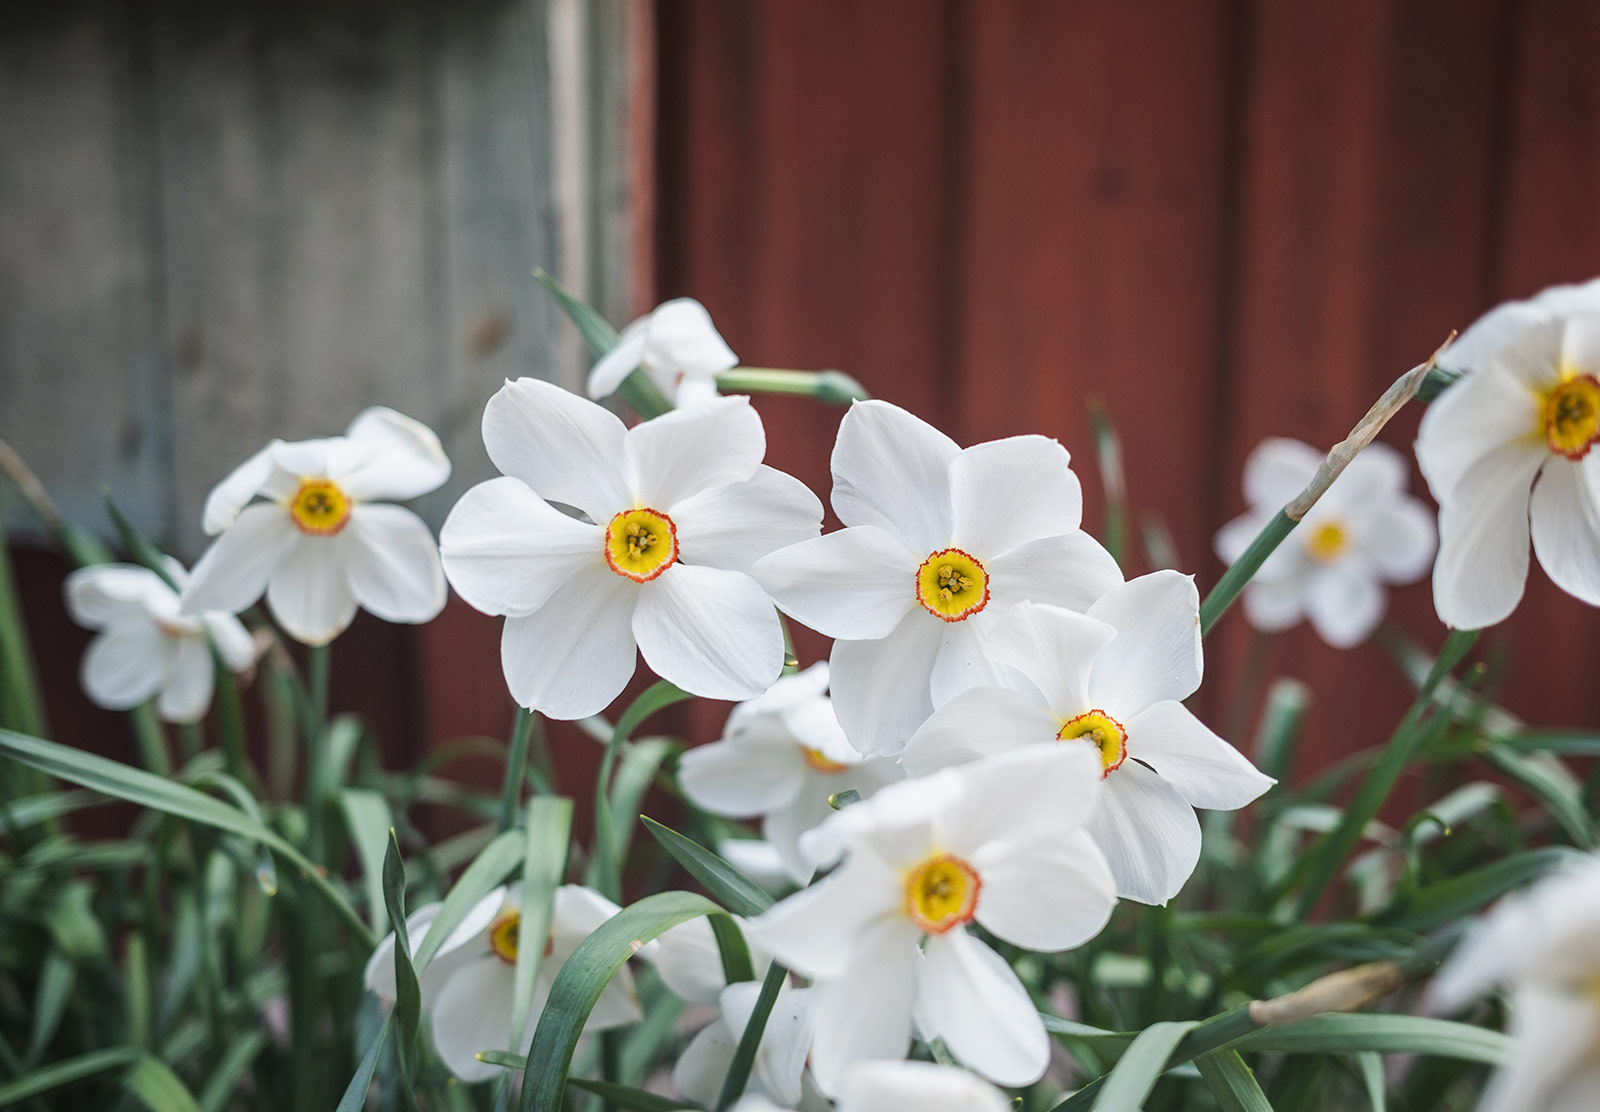 Daffodils against wooden wall